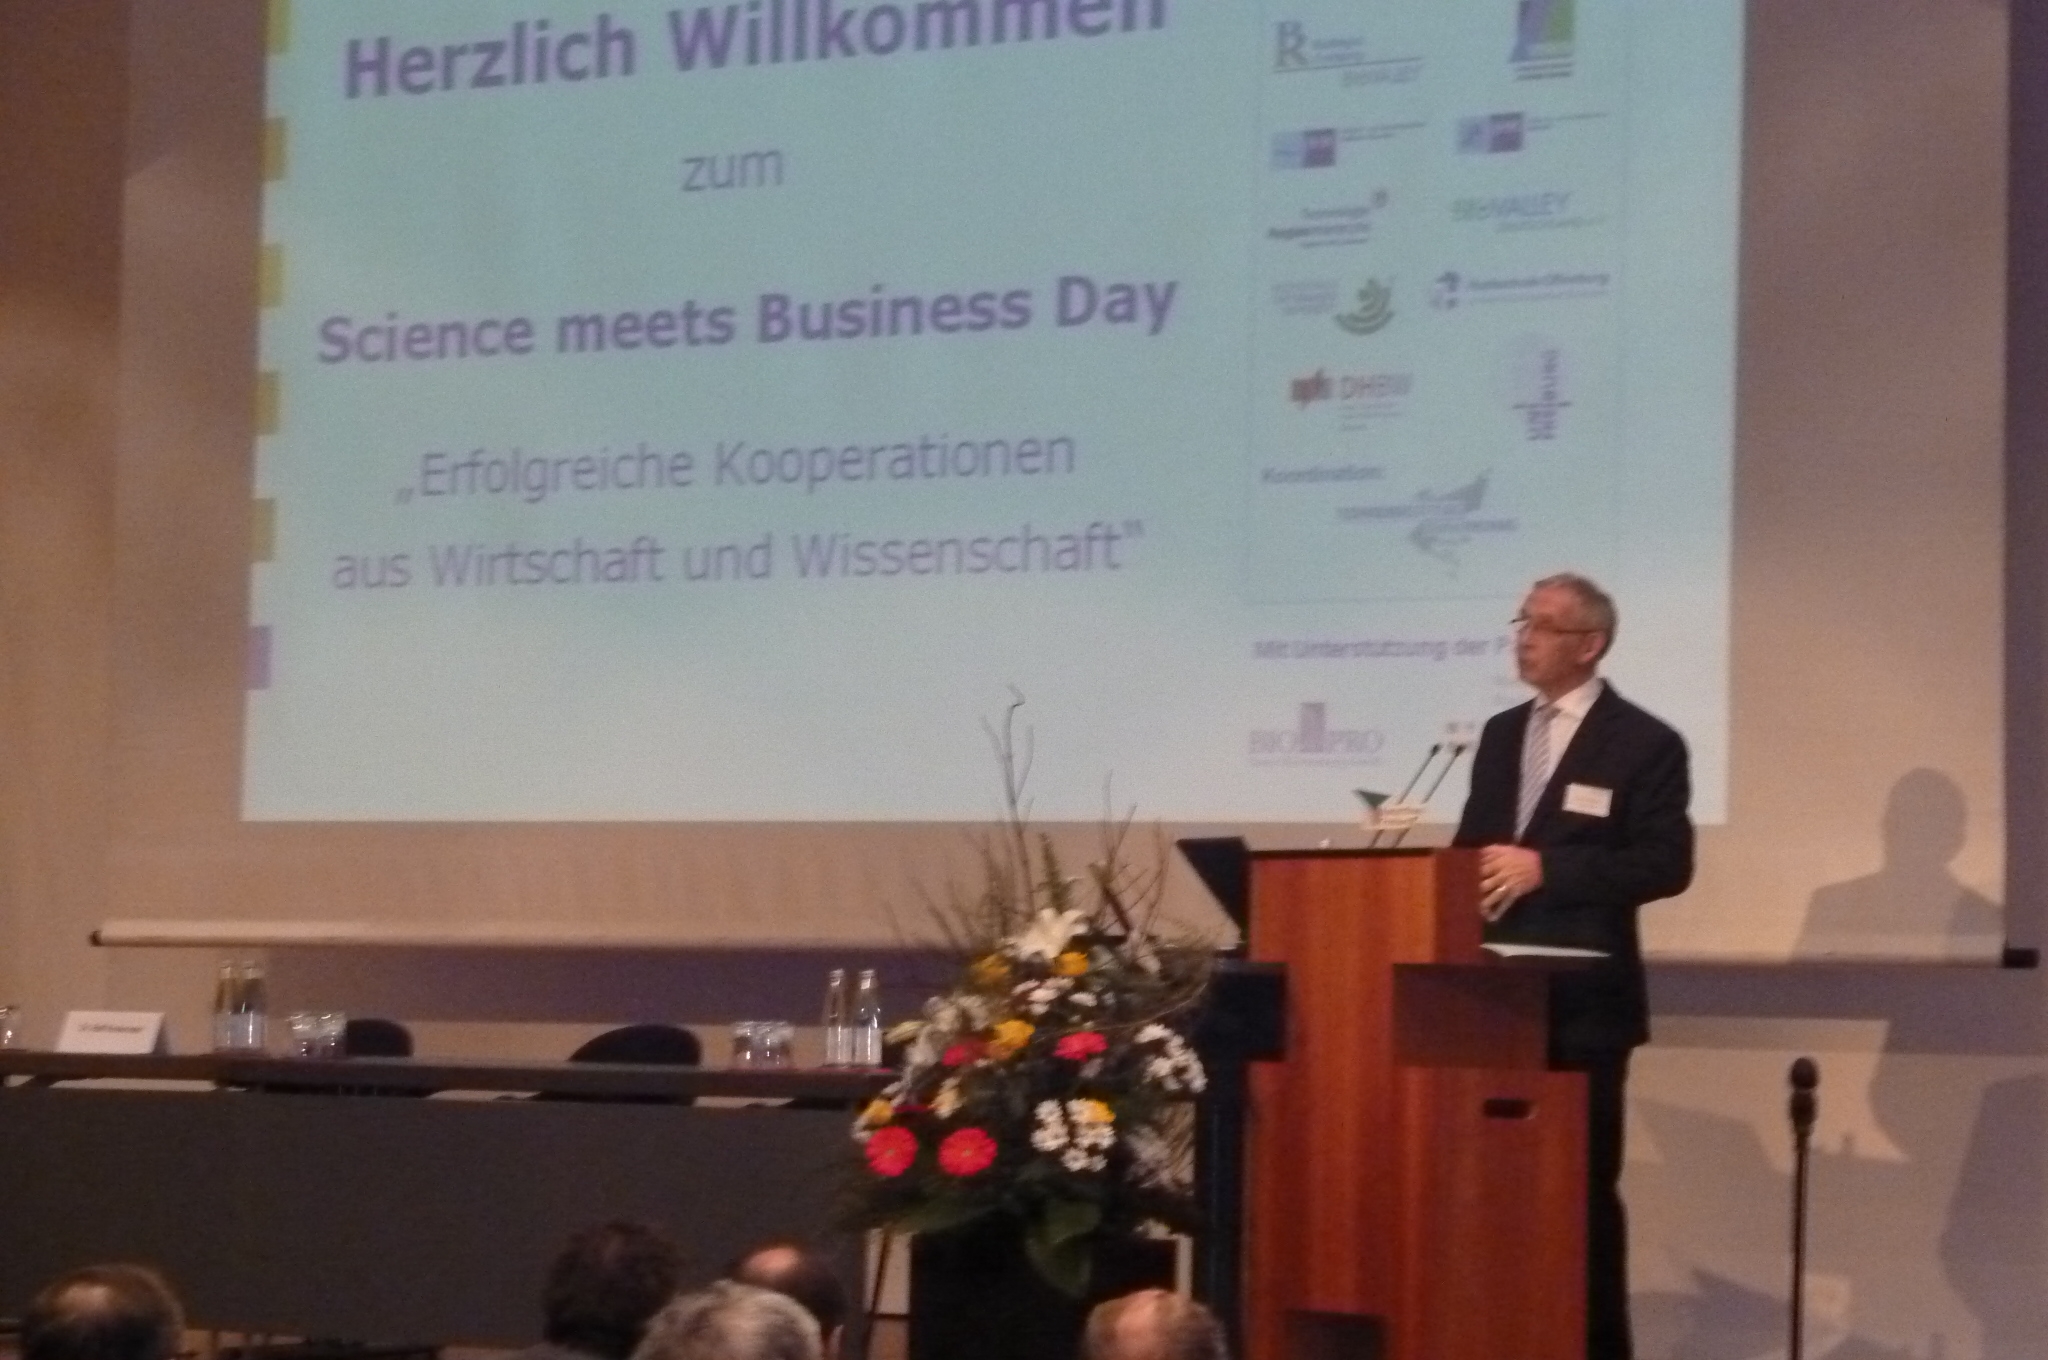 The photo shows Dr. Bernd Dallmann welcoming the audience to the Science meets Business Day in the Freiburg Concert Hall.